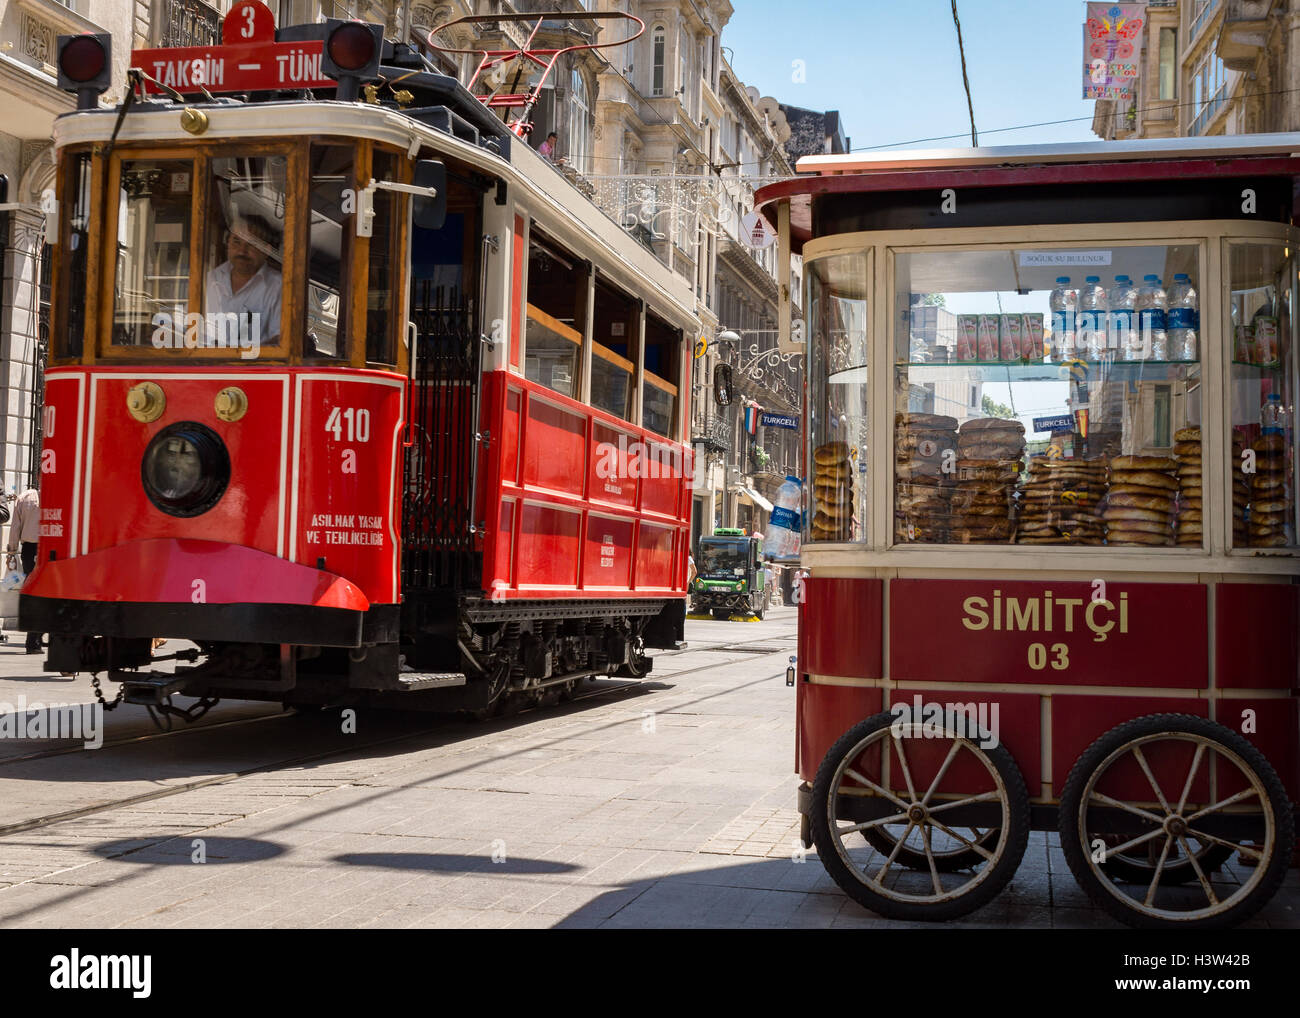 The tram transporting people from Taksim Square to Tünel – a 3km walk end-to-end, in Istanbul (Turkey) Stock Photo